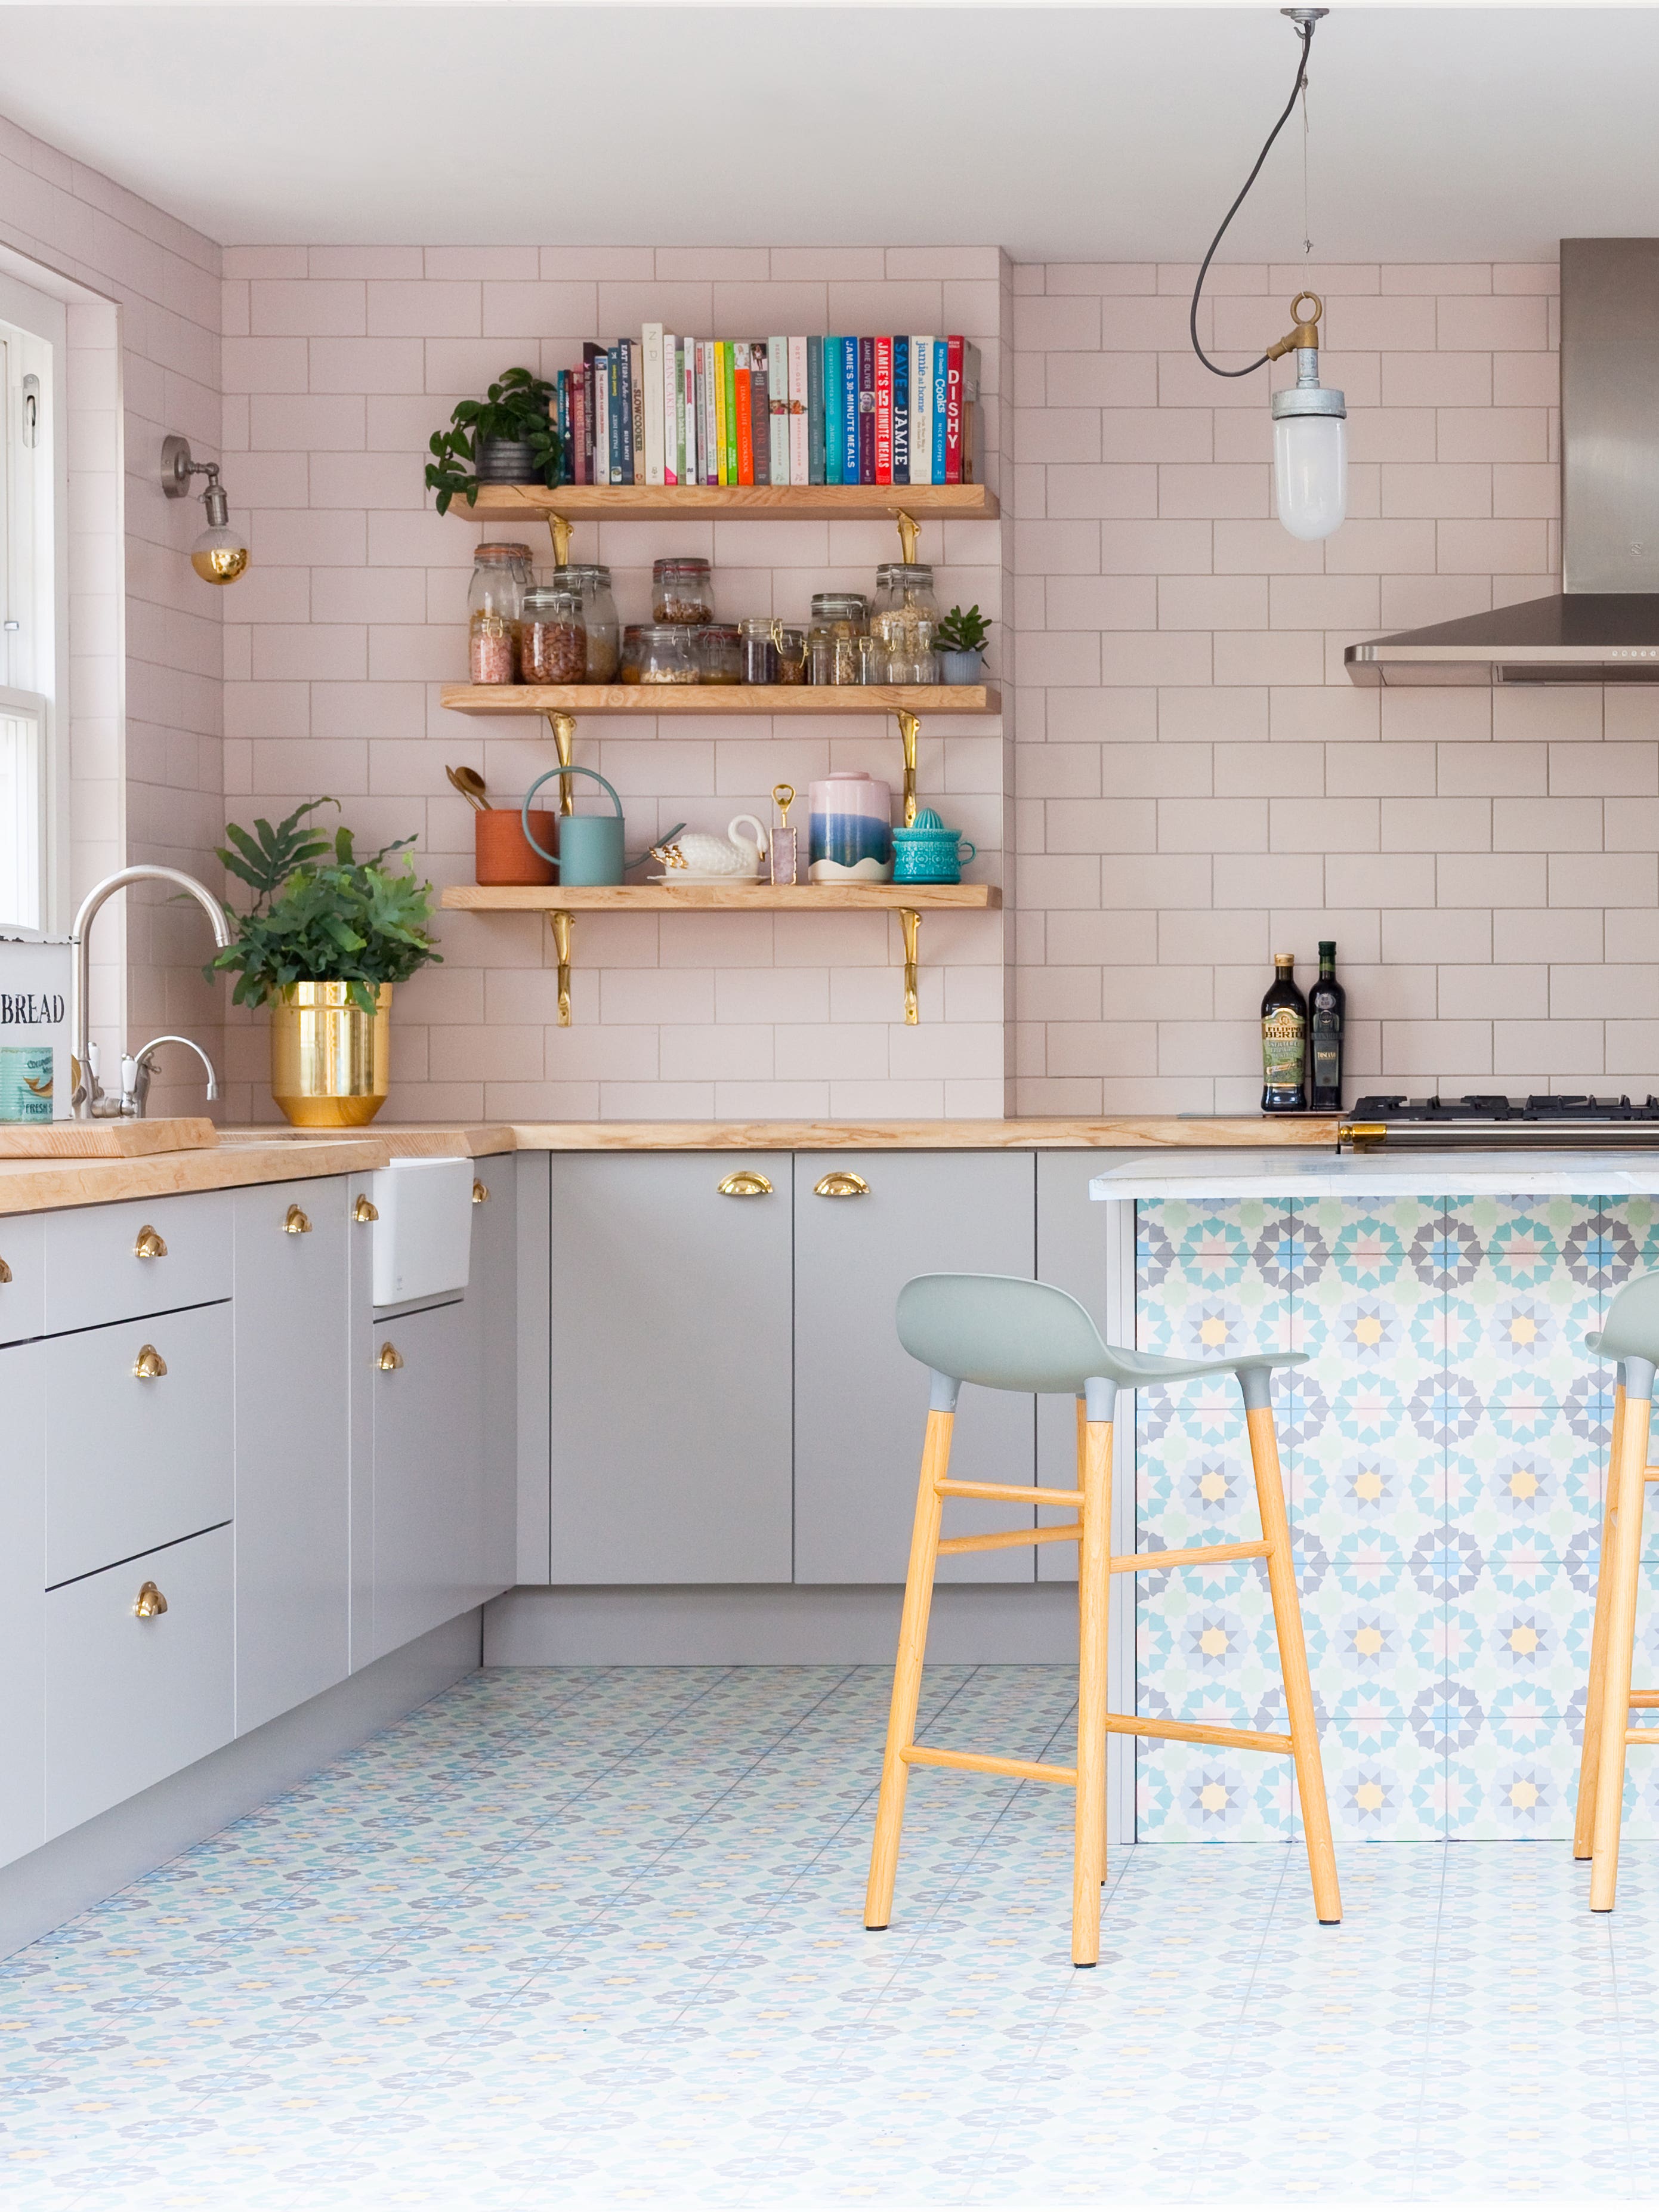 The Bright Colors of Sri Lanka Inspired the Design of This London Home